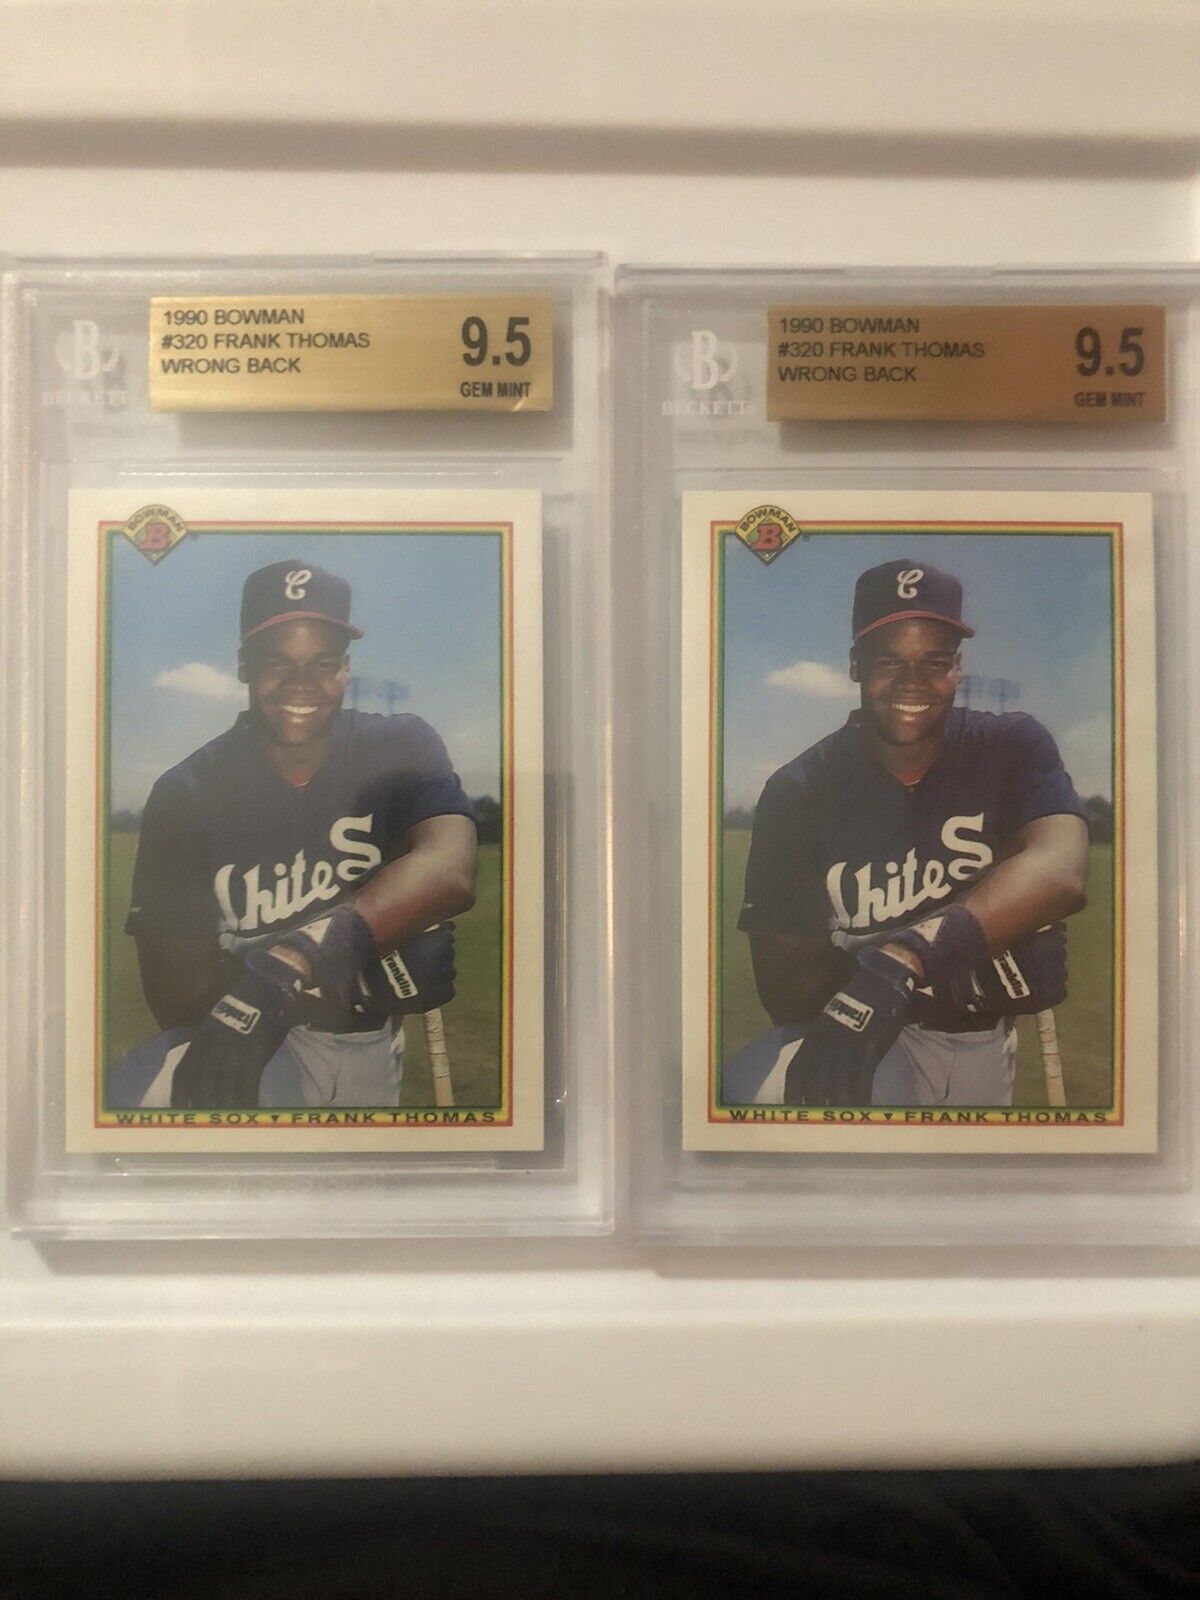 TWO-1990 Bowman Frank Thomas RC -Wrong Back ERROR -Graded BGS 9.5 -Only 2 Exist